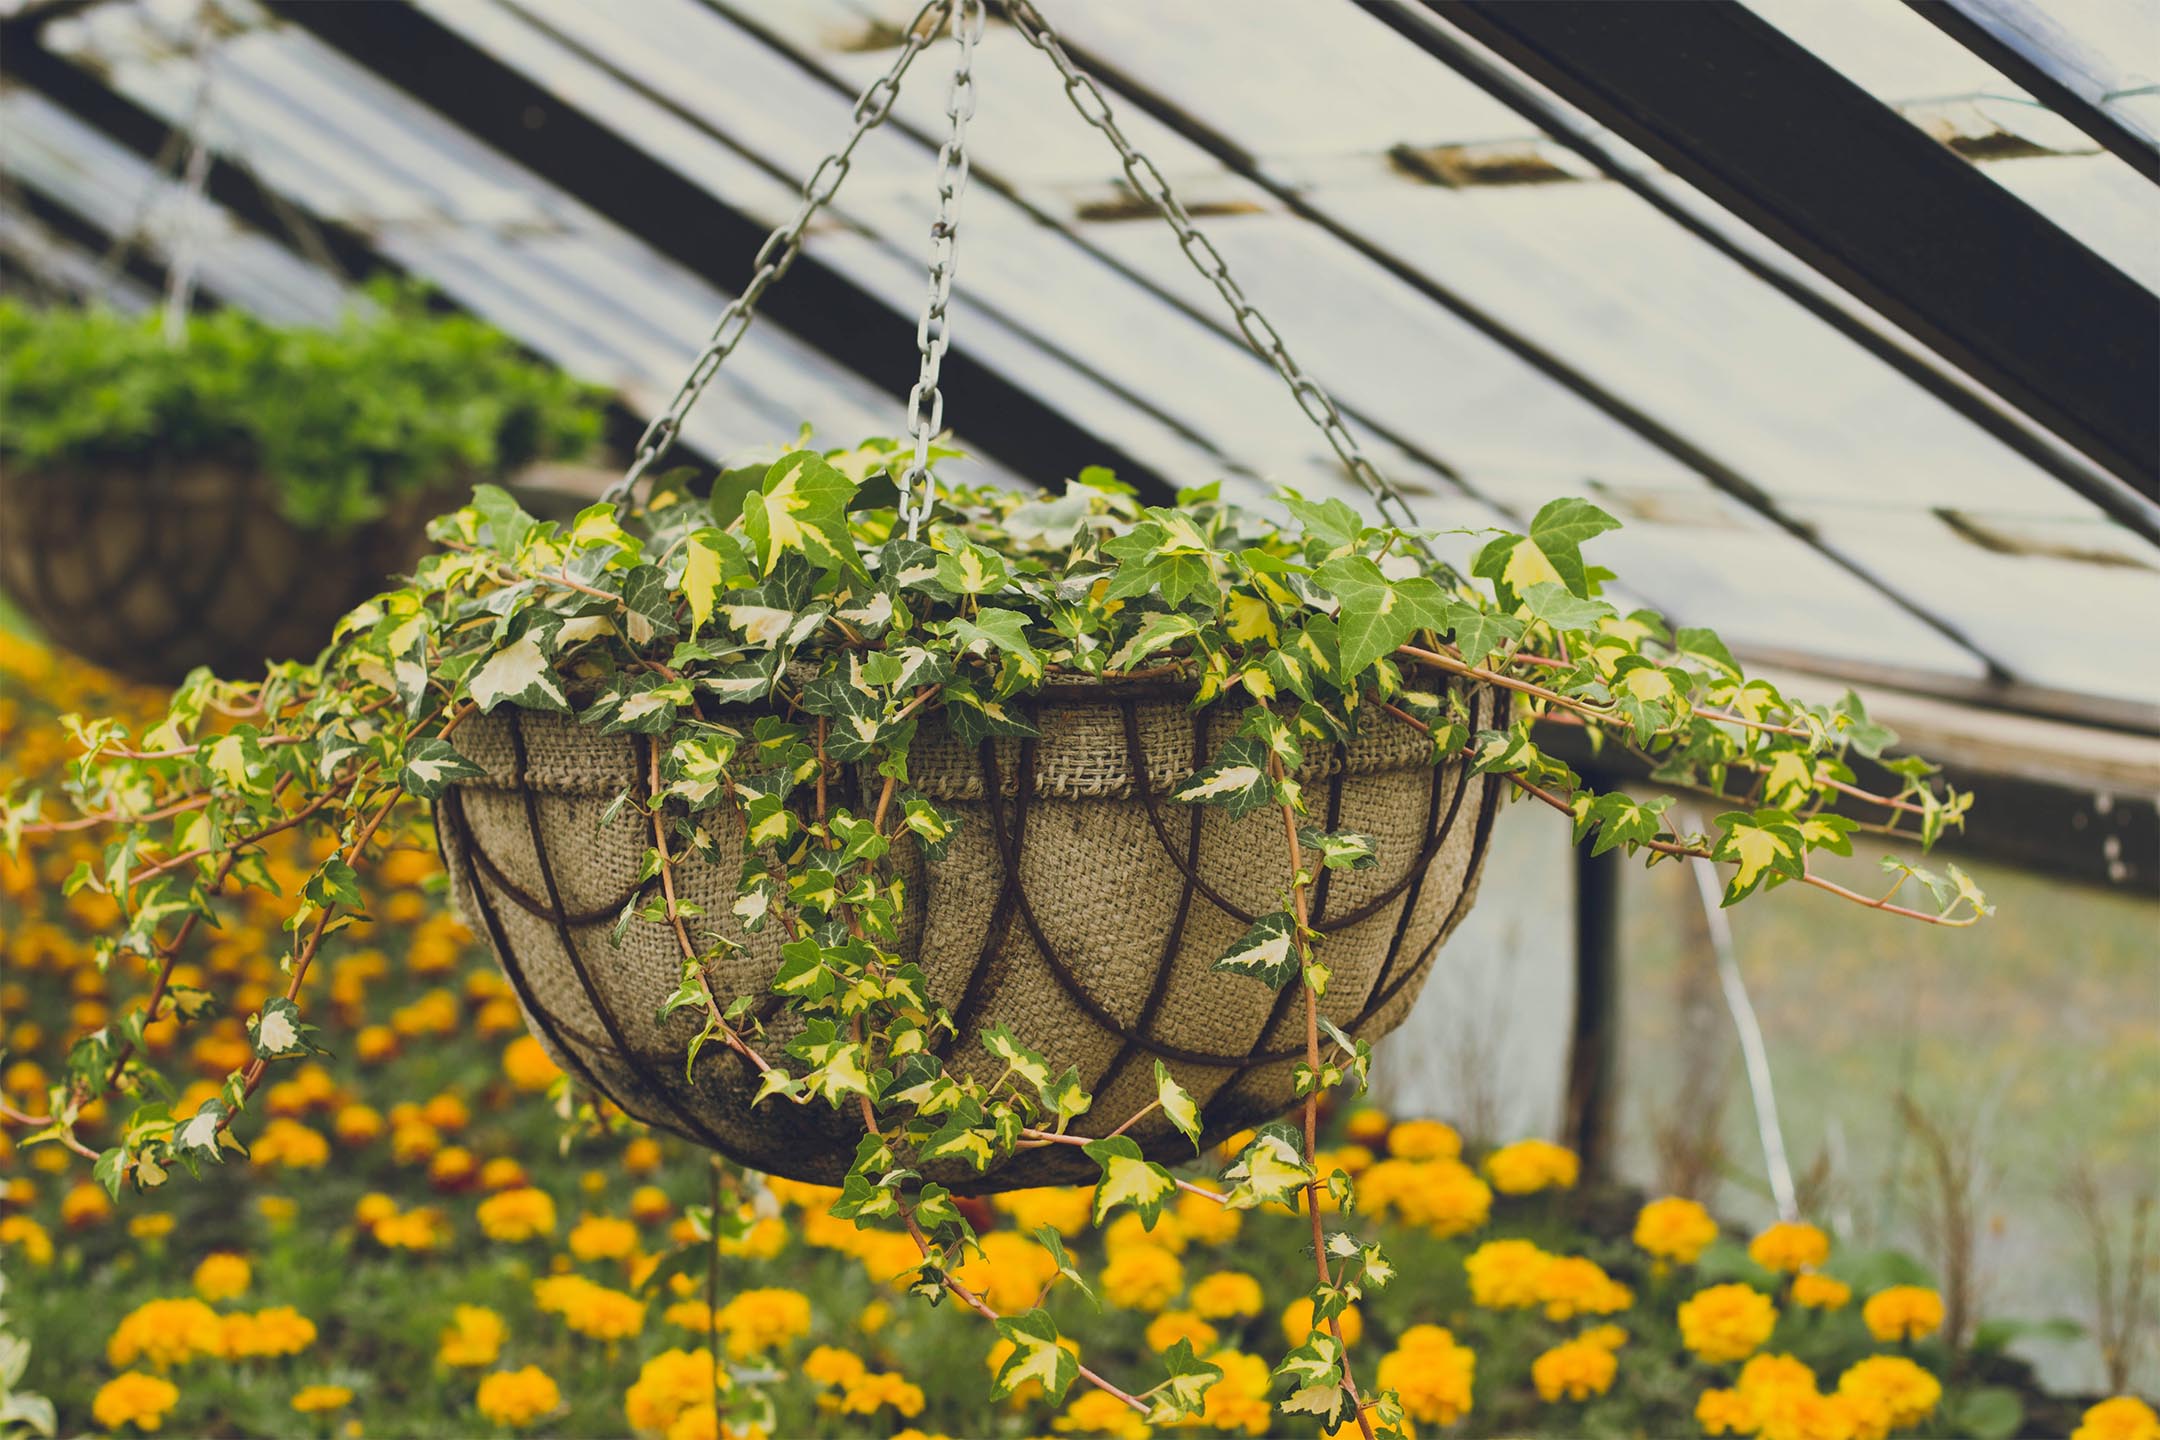 Houseplant in a hanging basket in a nursery